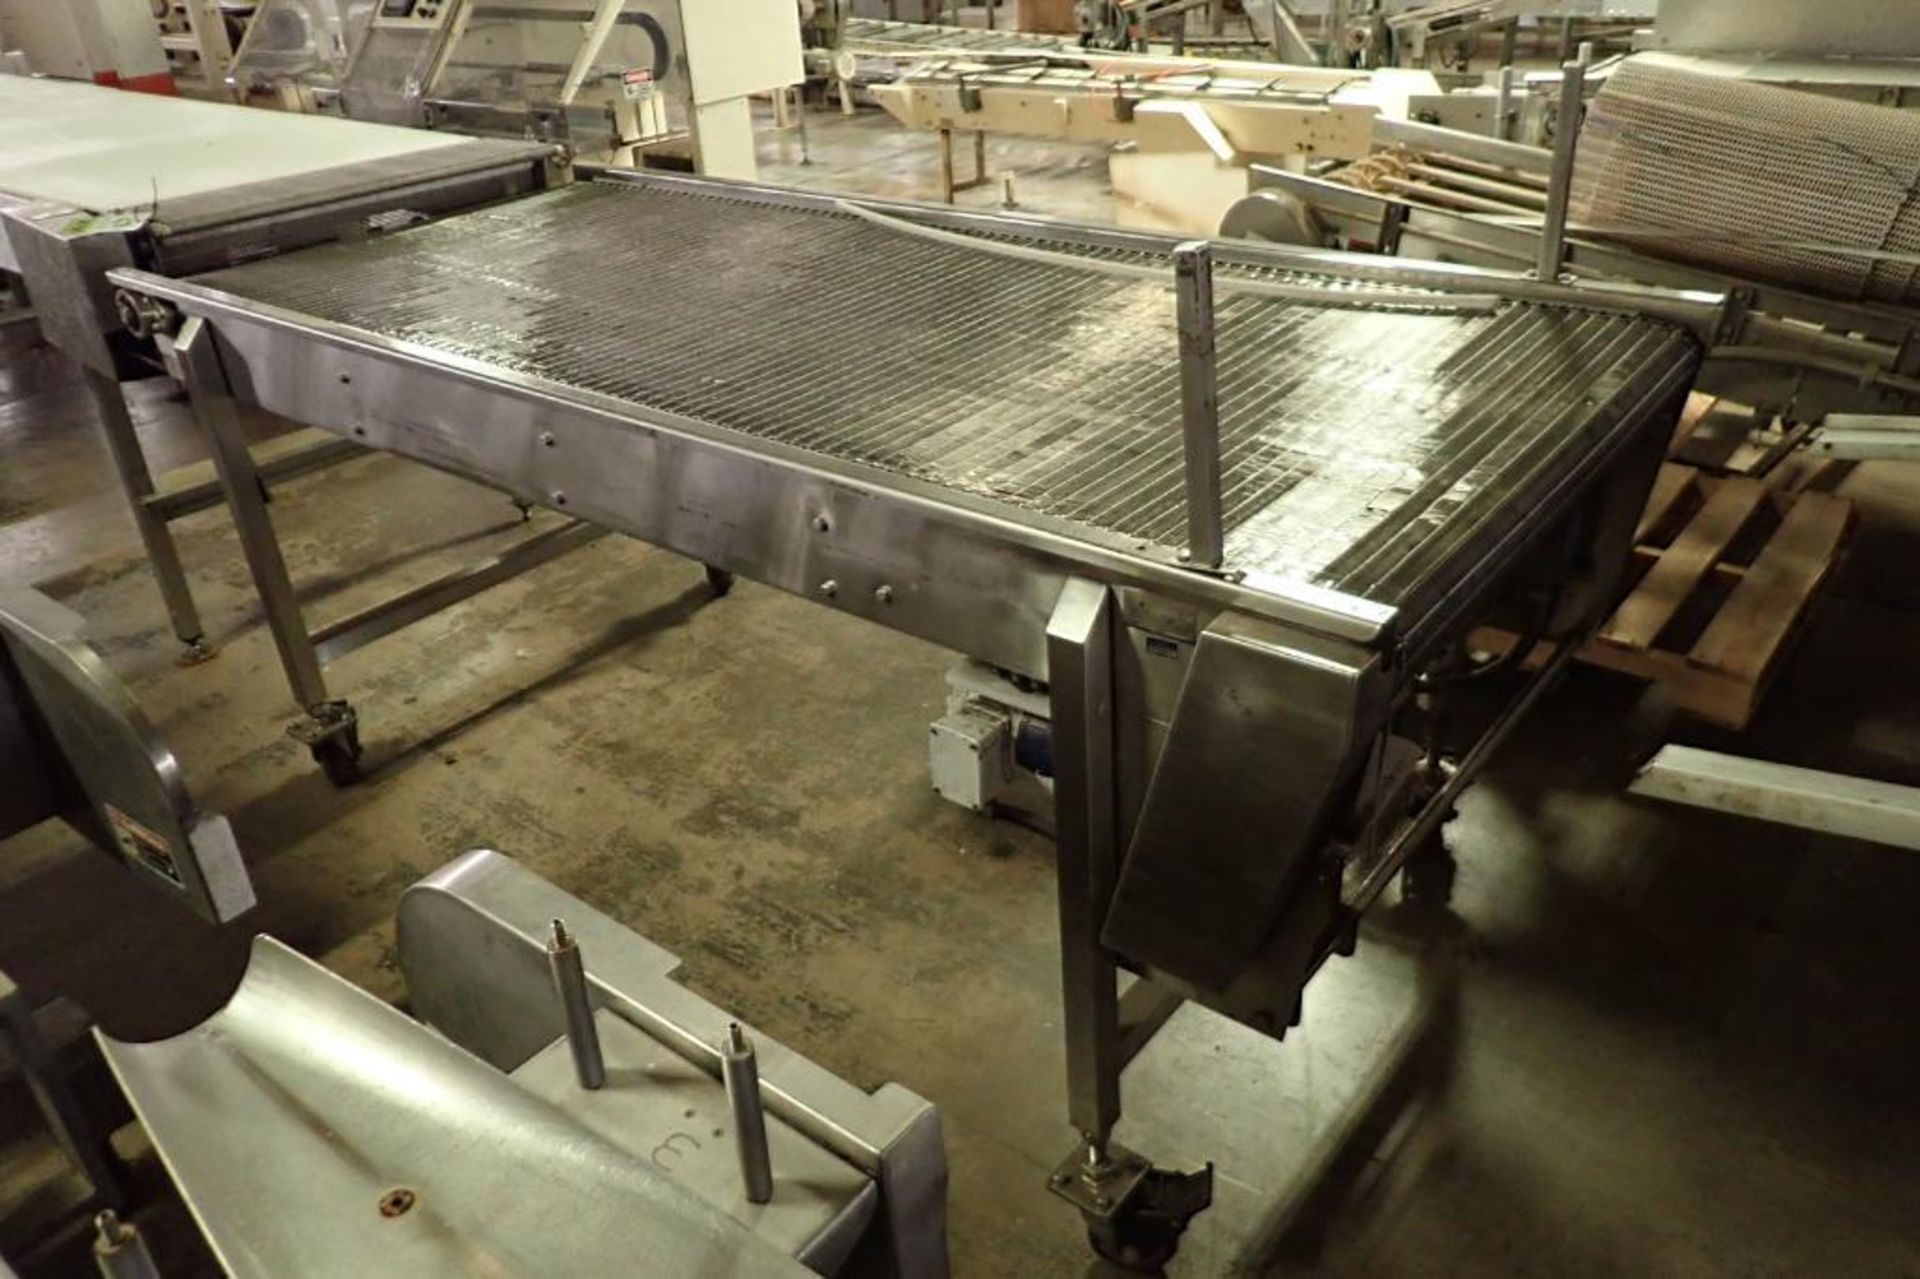 Kleenline SS conveyor {Located in Indianapolis, IN}